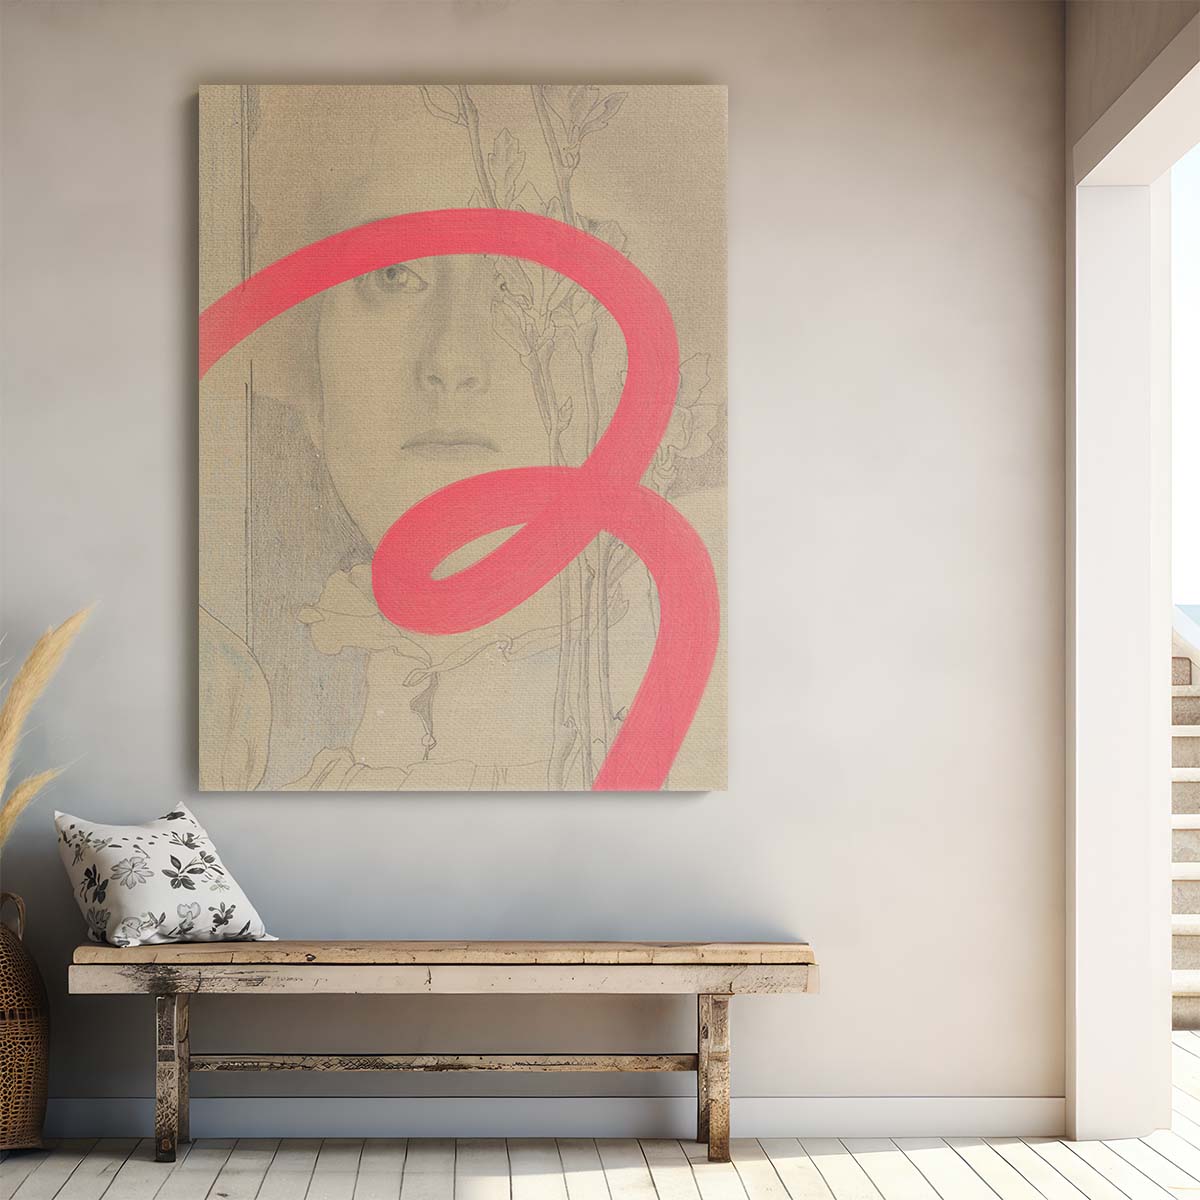 Vintage Neon Woman Abstract Illustration Wall Art by Yopie Studio by Luxuriance Designs, made in USA